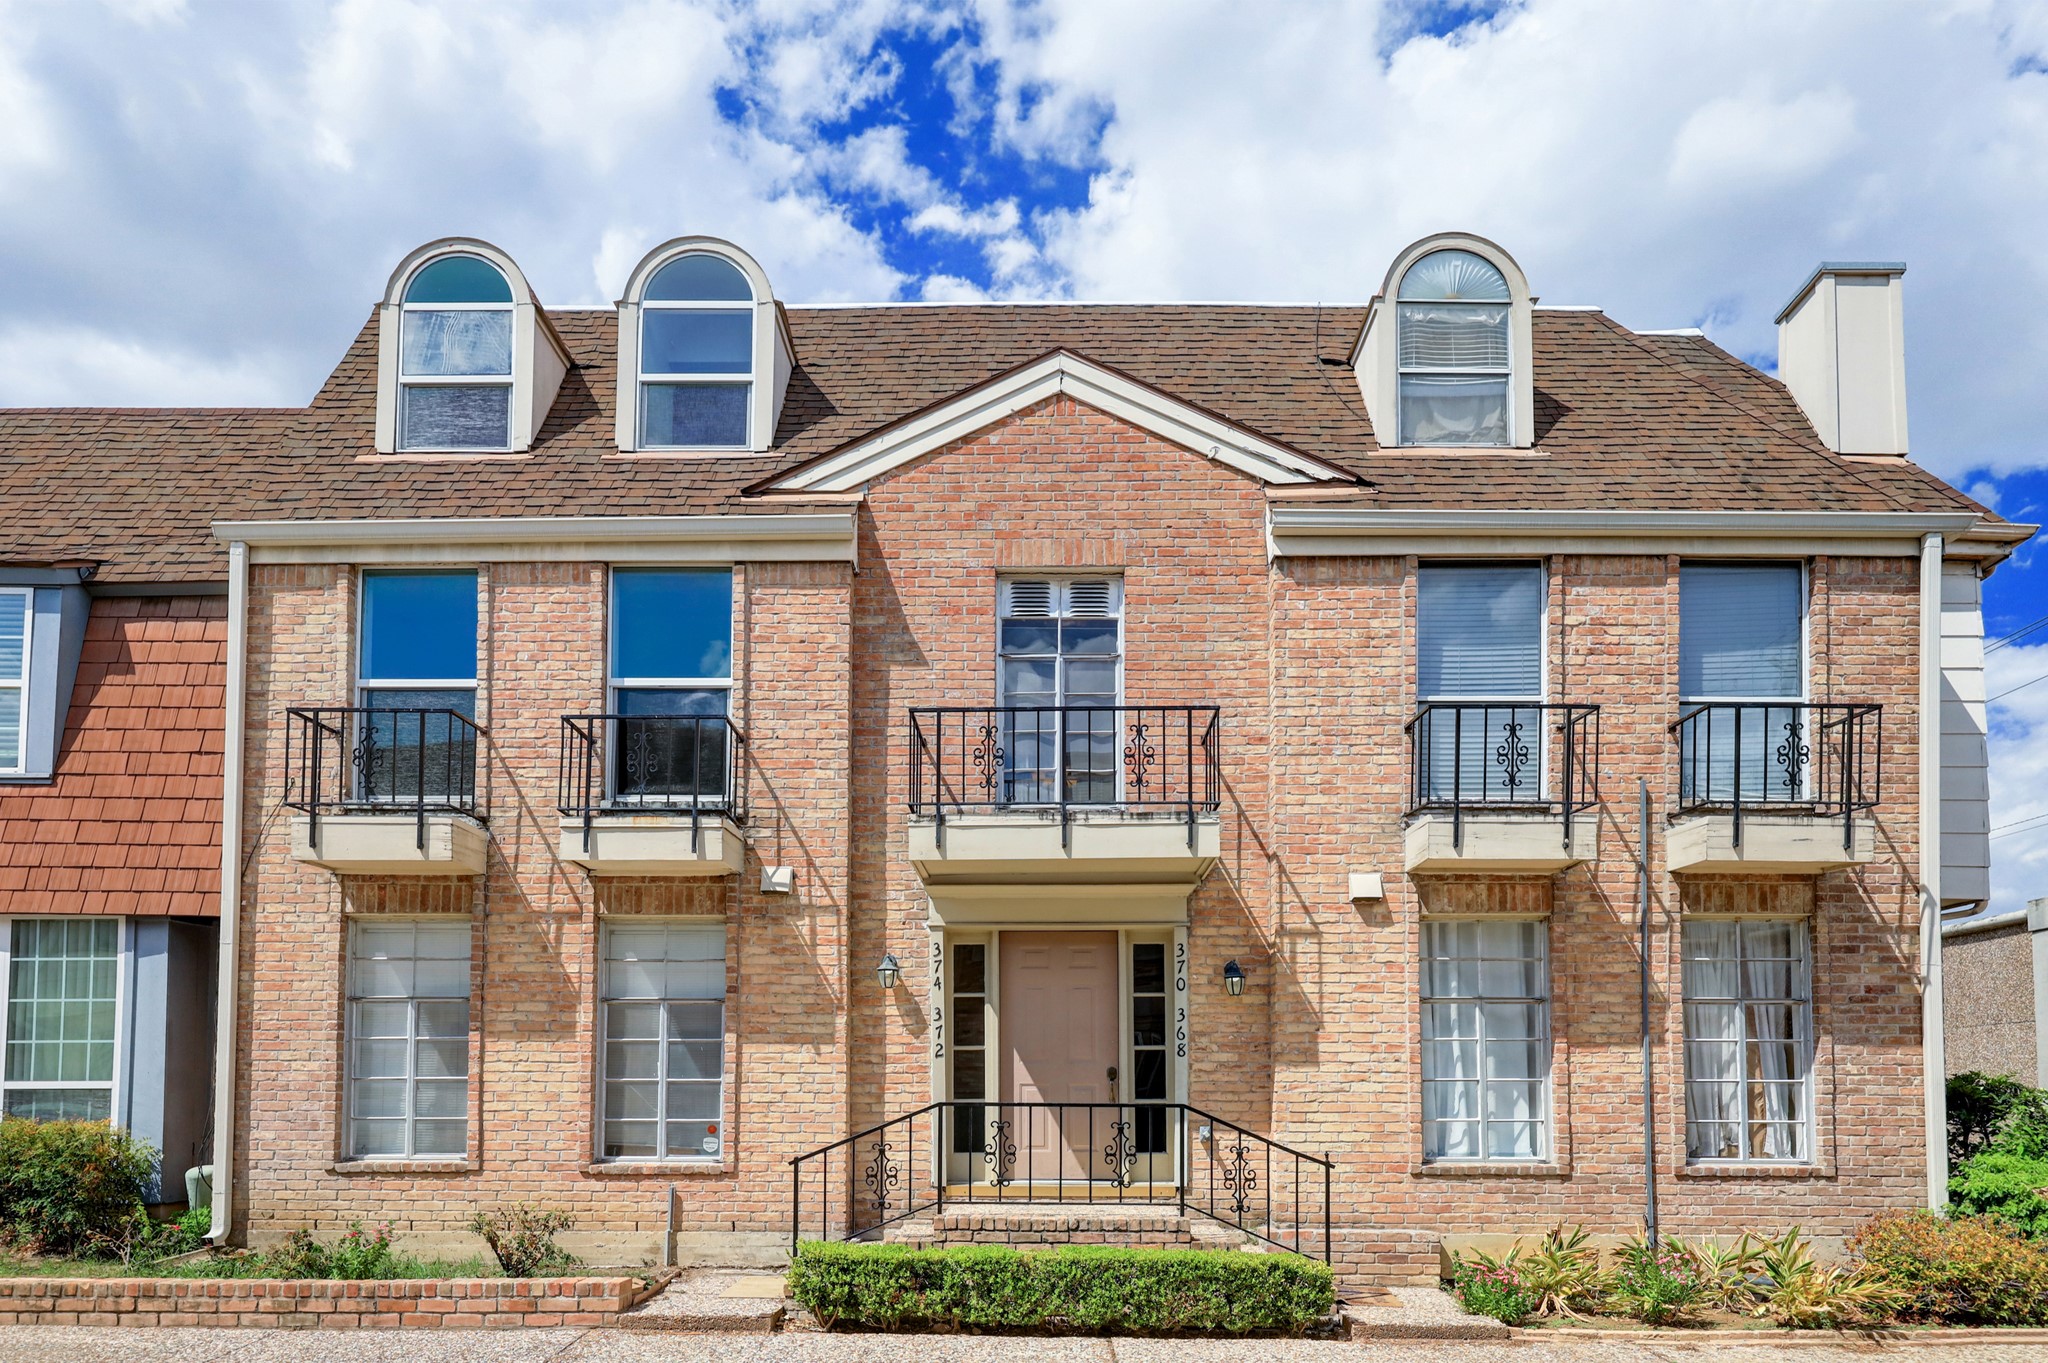 Ideally located near Memorial Park, The Galleria, River Oaks, NRG Stadium, downtown Houston, the Texas Medical Center and more, this fantastic two bedroom, two and half bathroom home offers an extensive list of improvements and is ready for new owners to love.